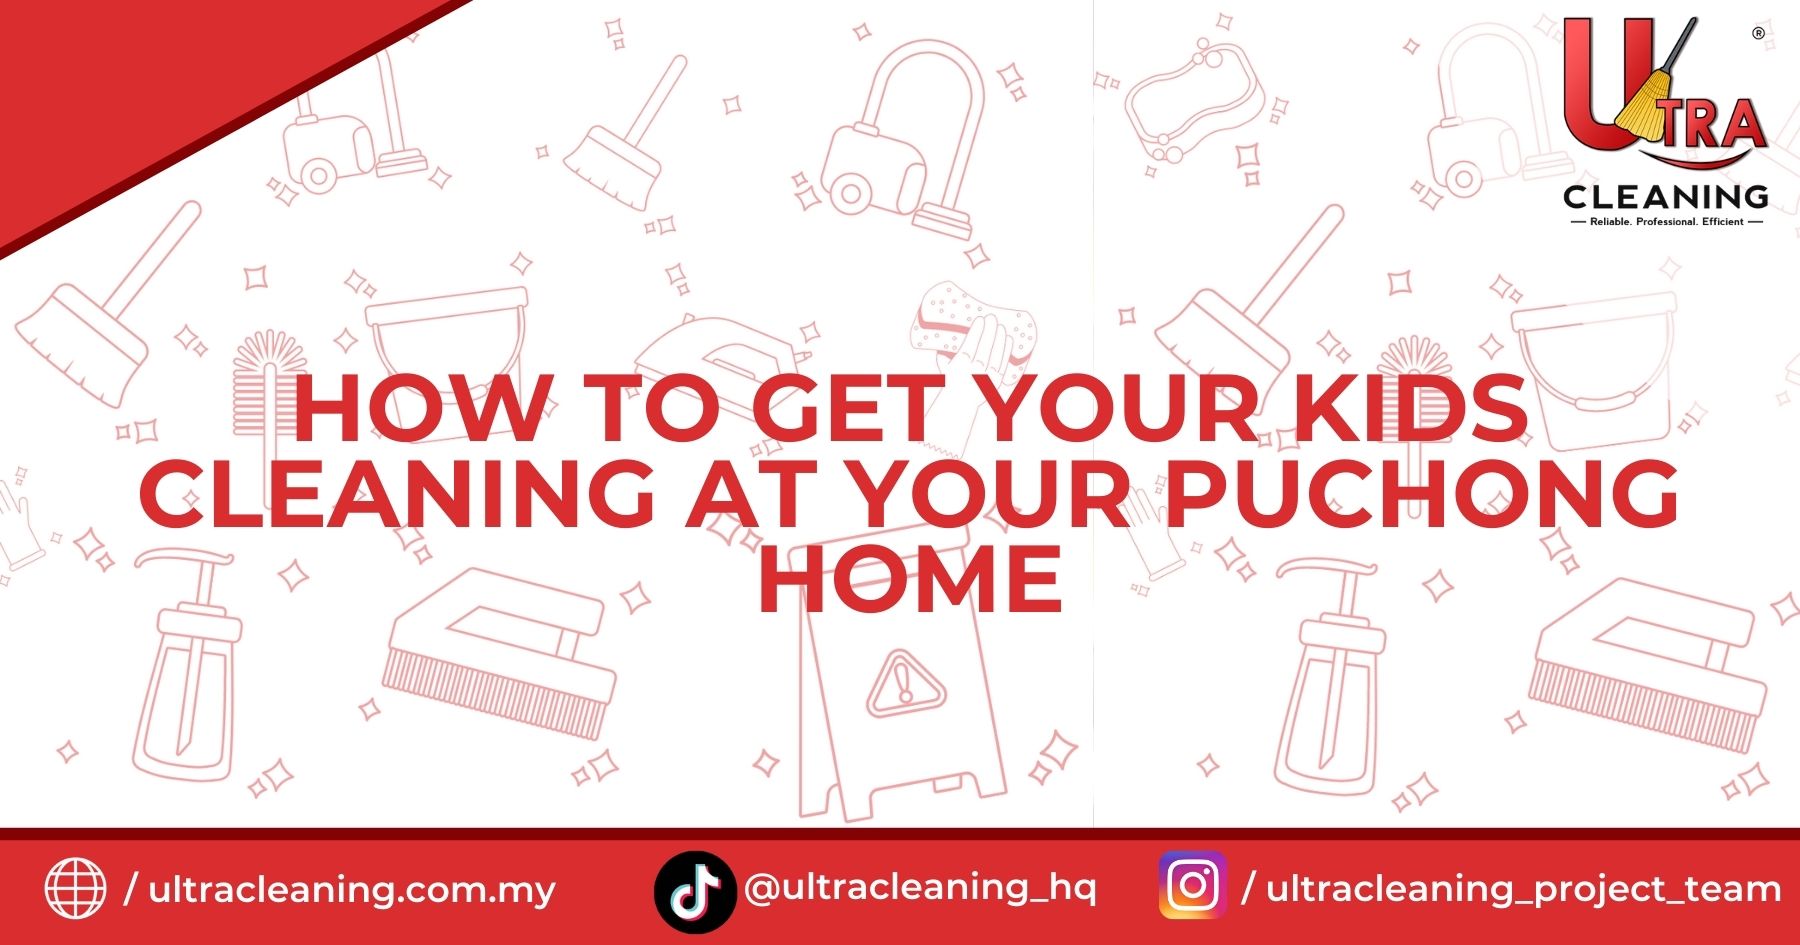 How to Get Your Kids Cleaning at Your Puchong Home